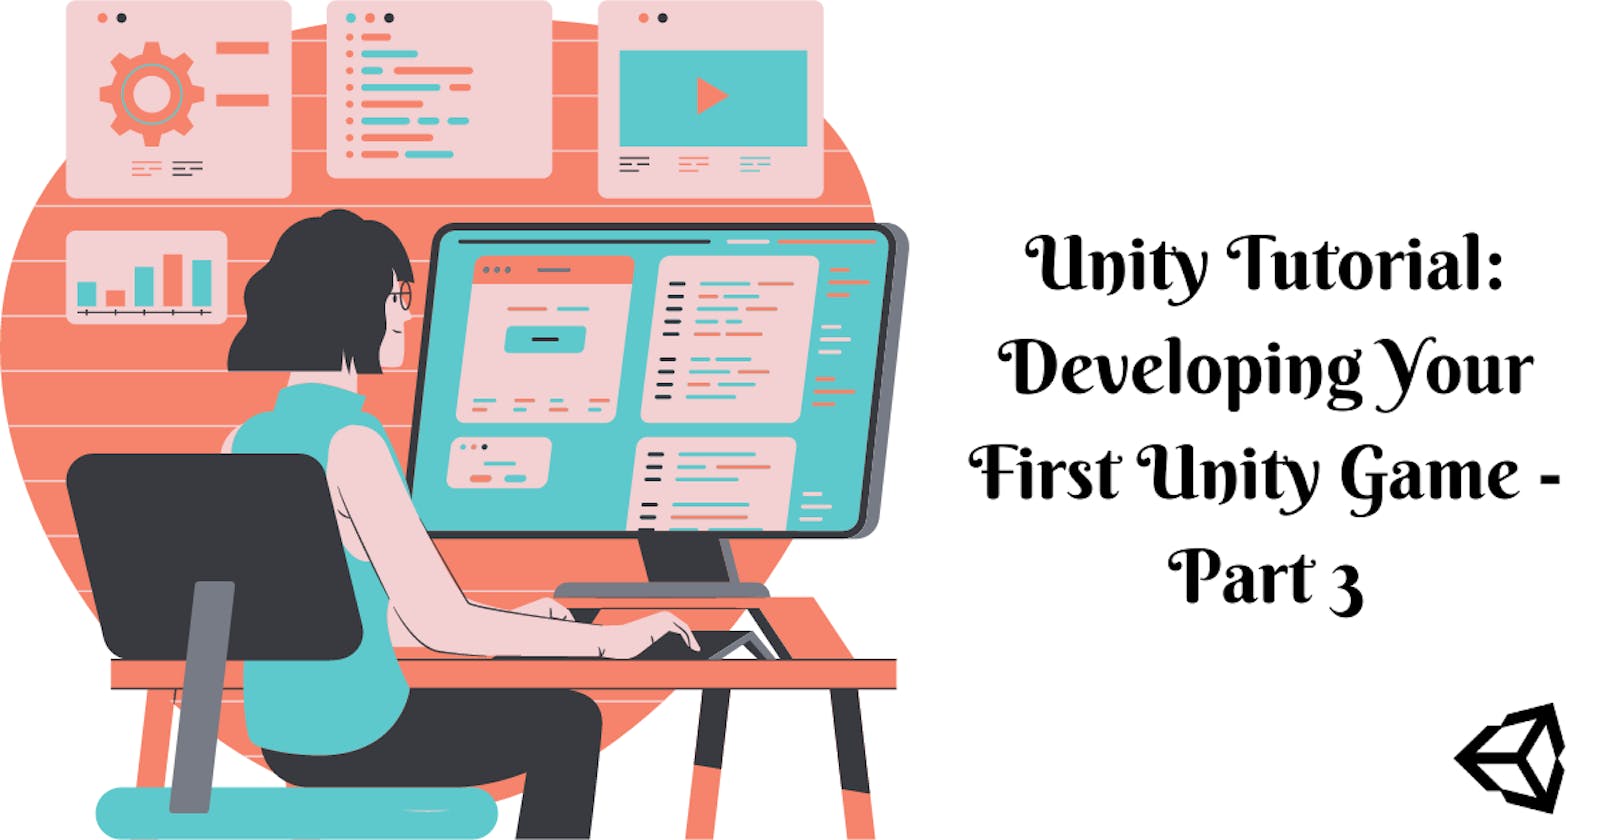 Unity Tutorial: Developing Your First Unity Game - Part 3